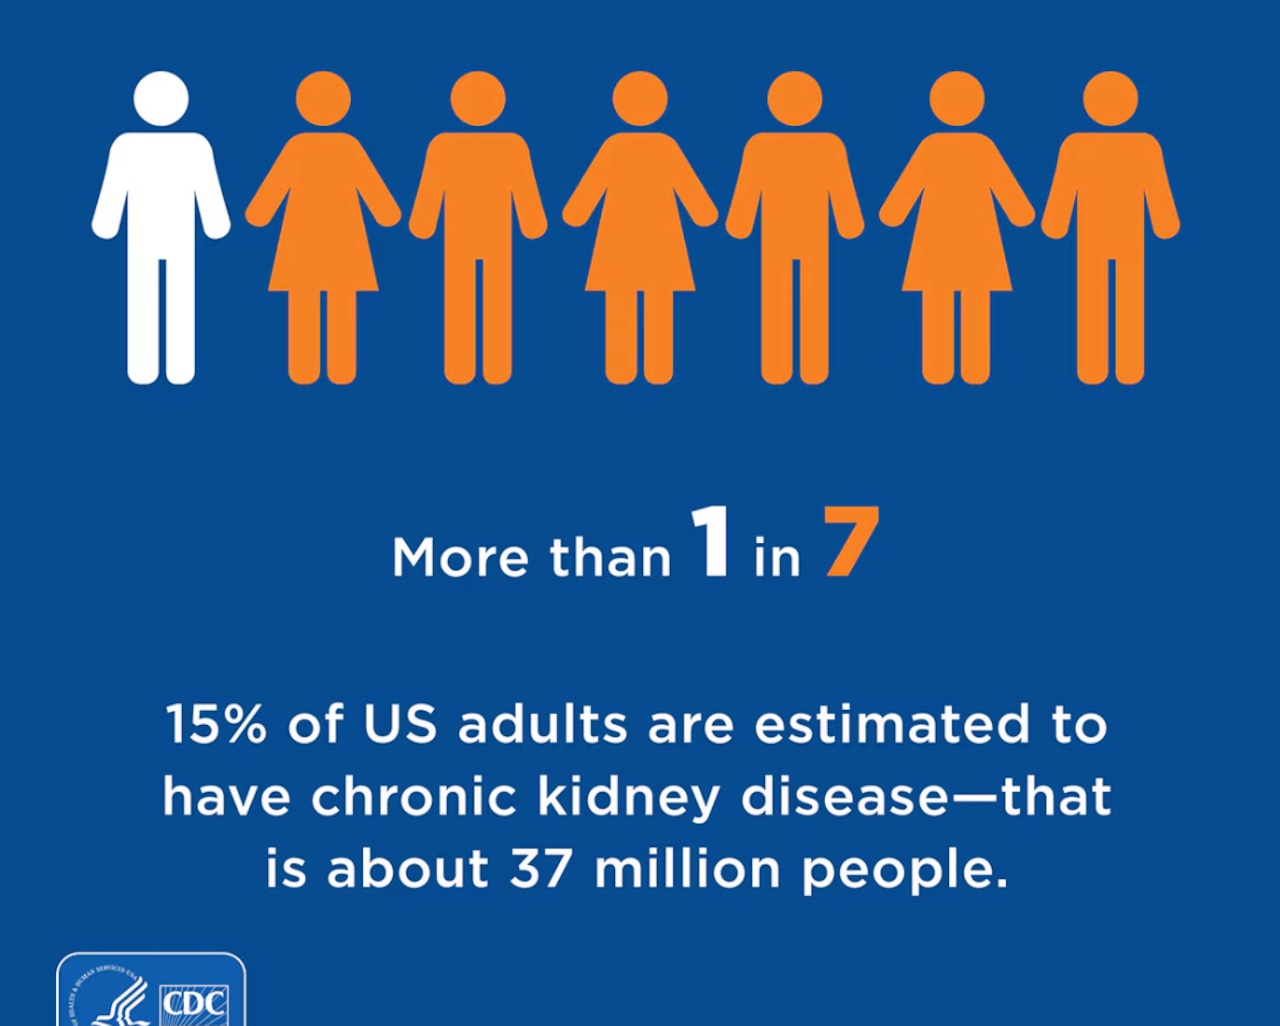 Kidney disease is focus of Patient Symposium, with sessions in person and virtual [Video]